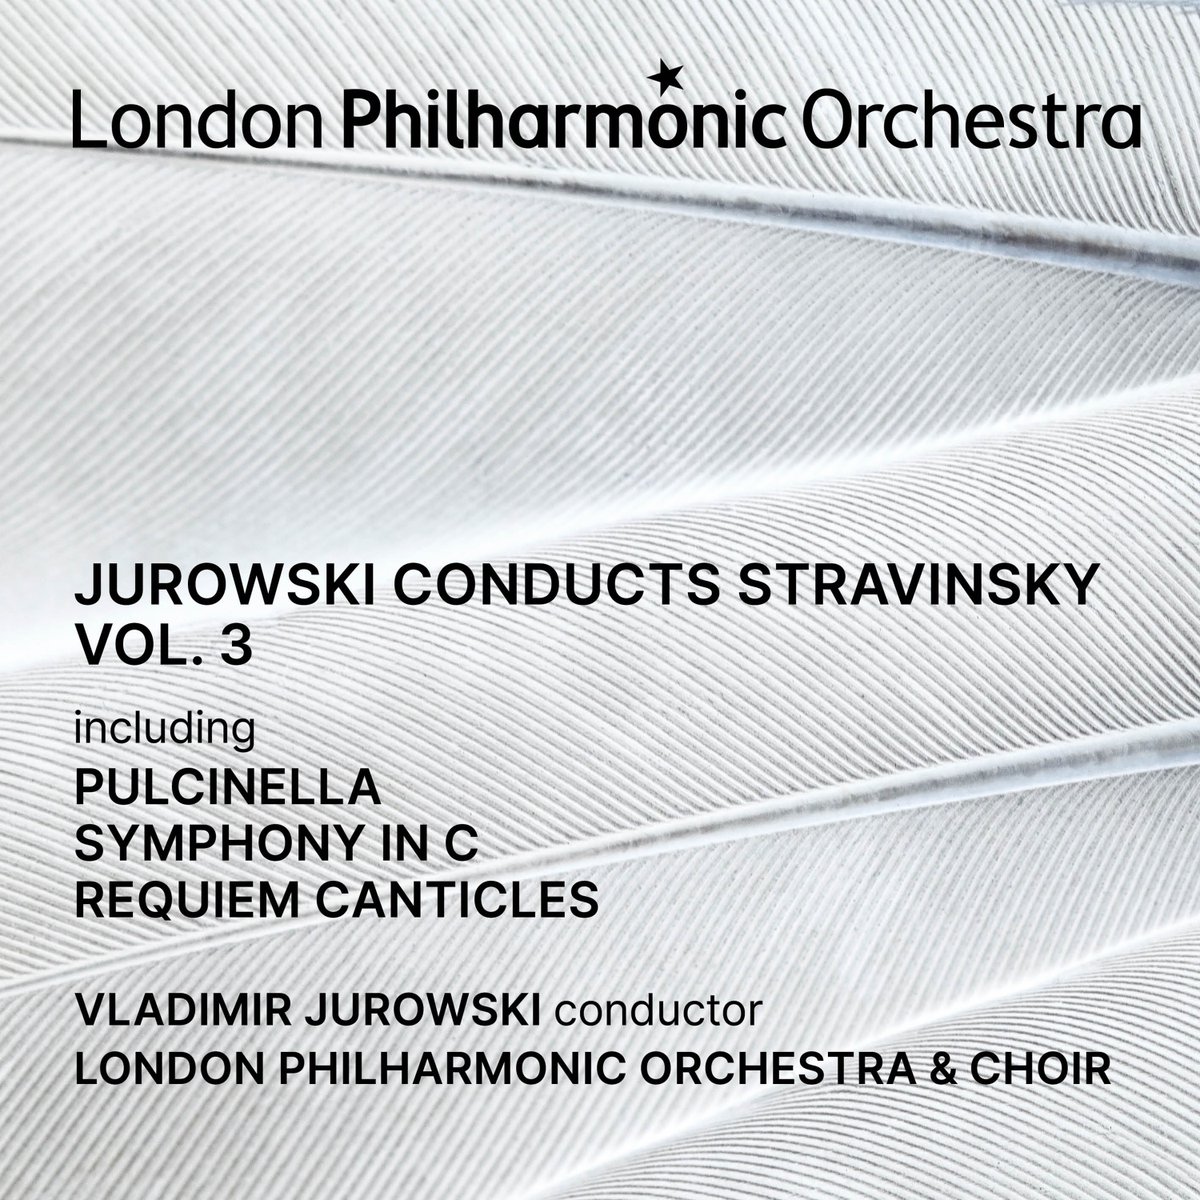 The third and final recording in a three-volume series from Vladimir Jurowski and the London Philharmonic Orchestra. You heard it here first: apple.co/StravinskyJ